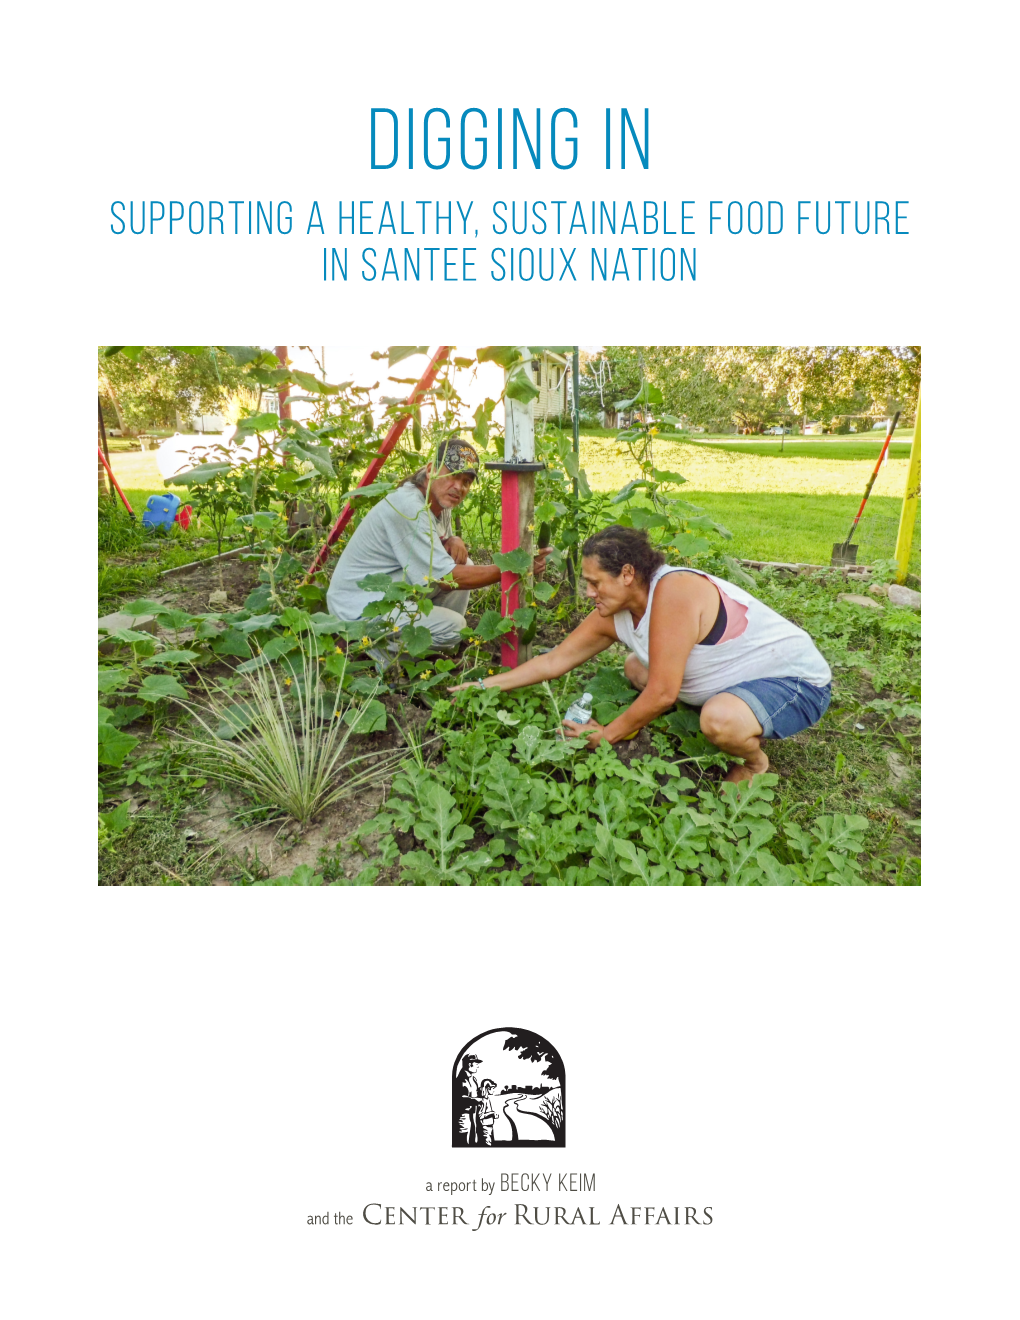 Supporting a Healthy, Sustainable Food Future in Santee Sioux Nation